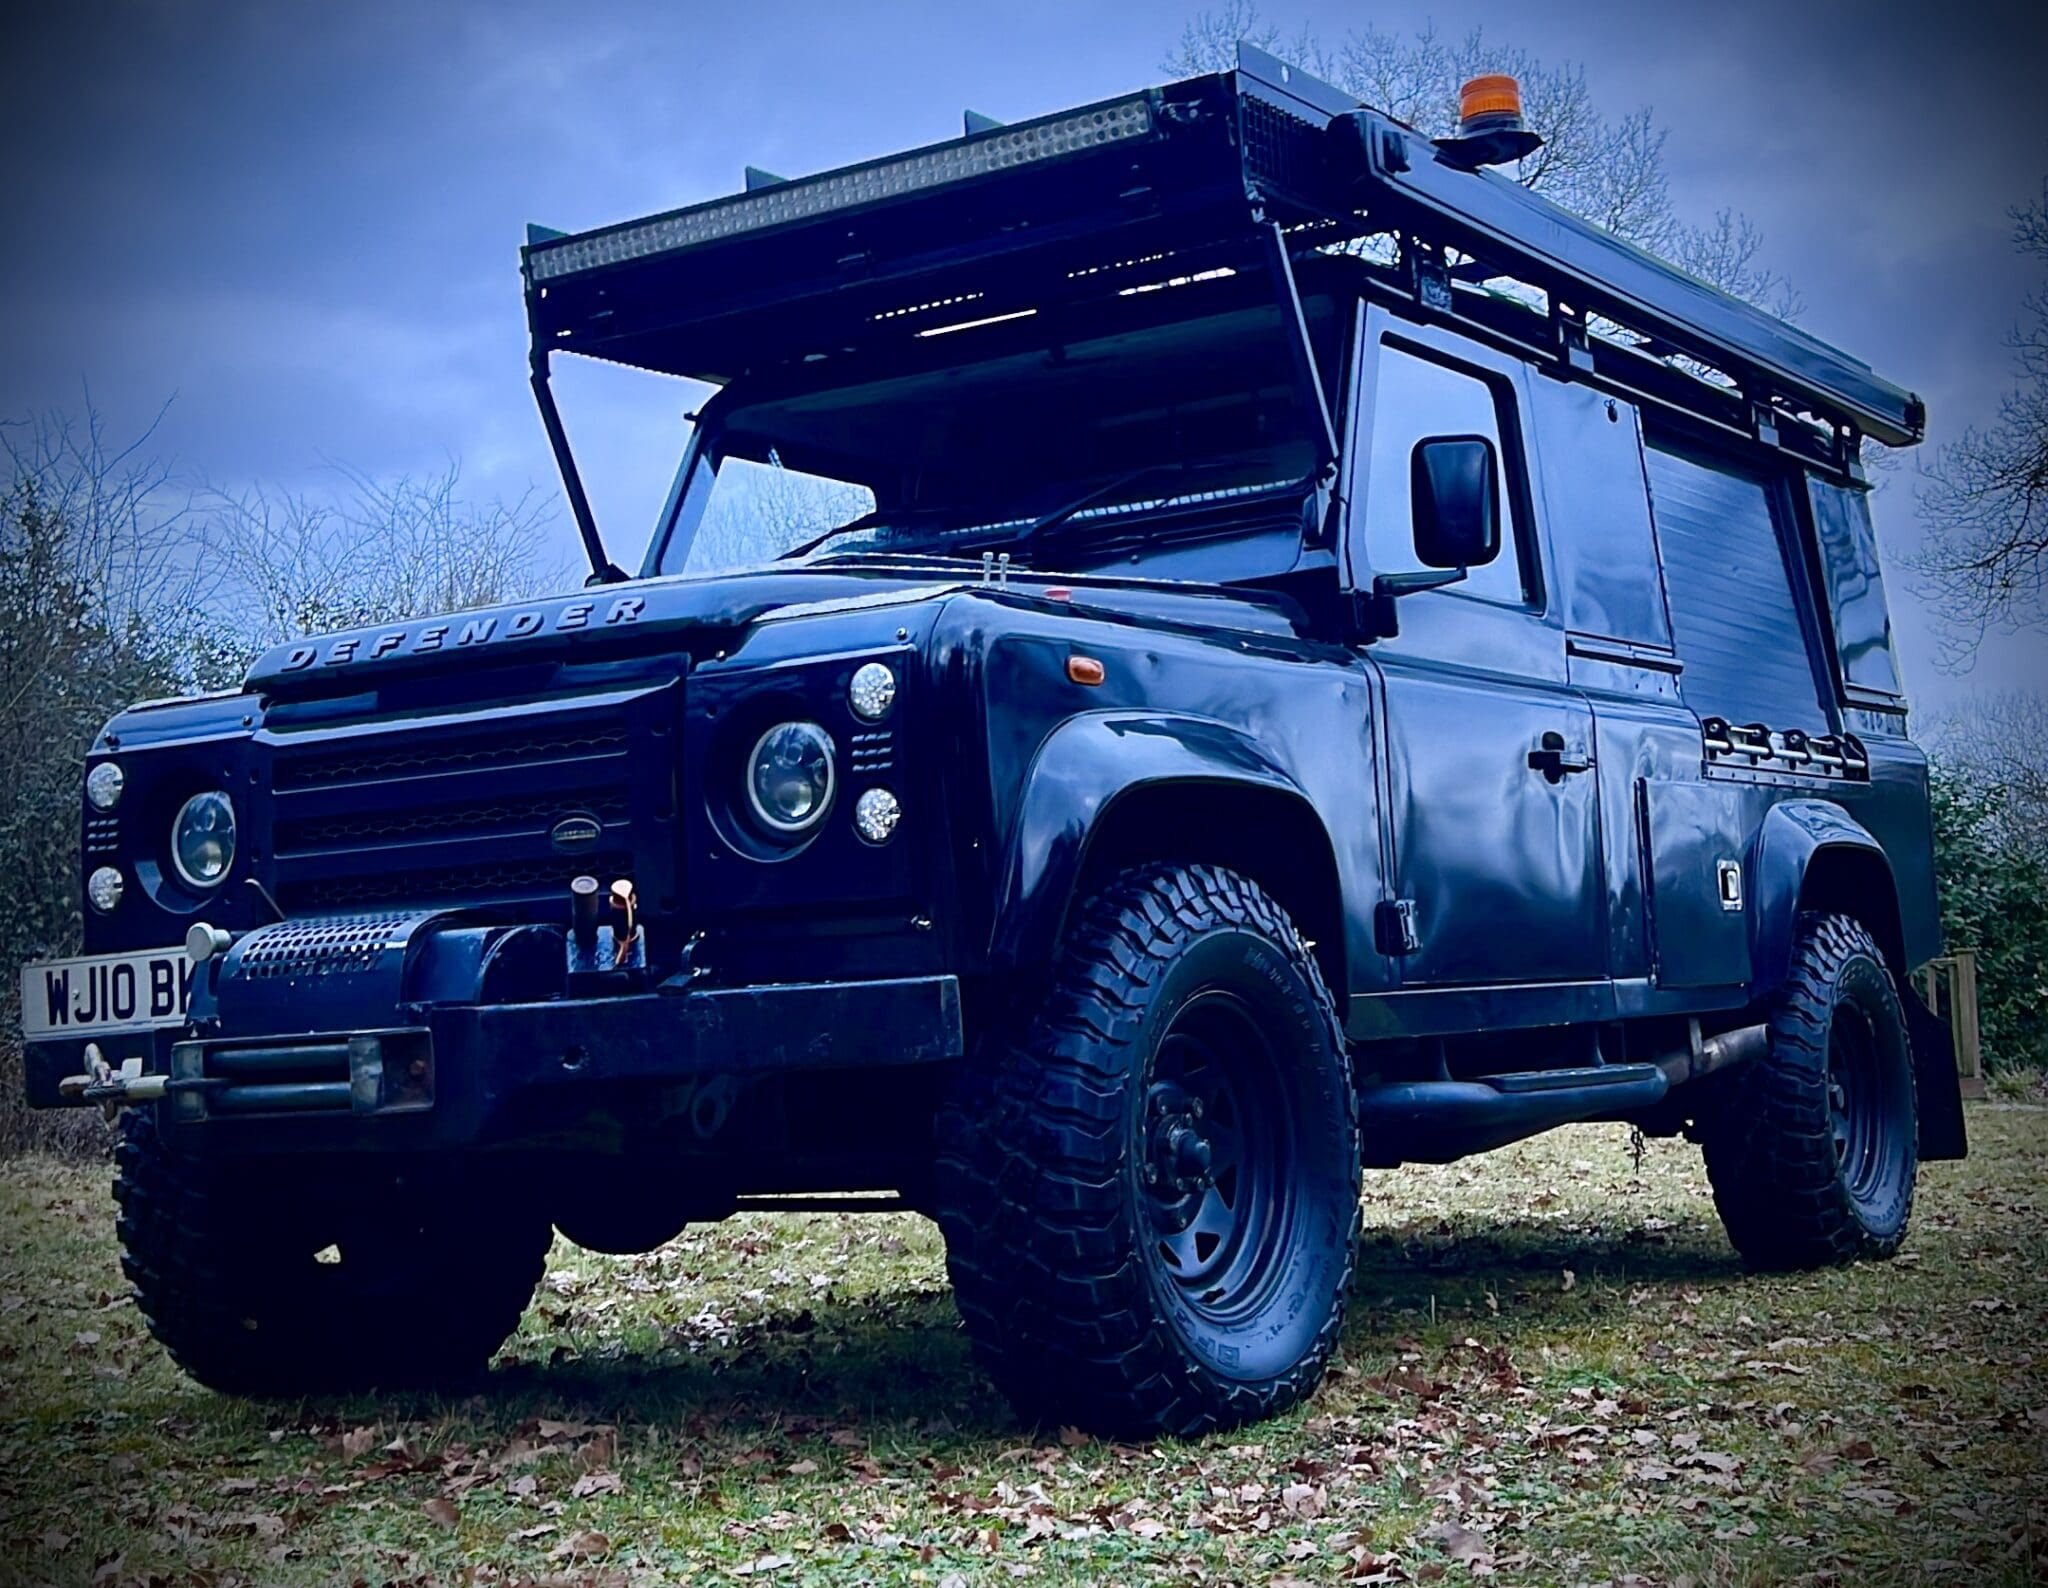 A black land rover parked in a field.